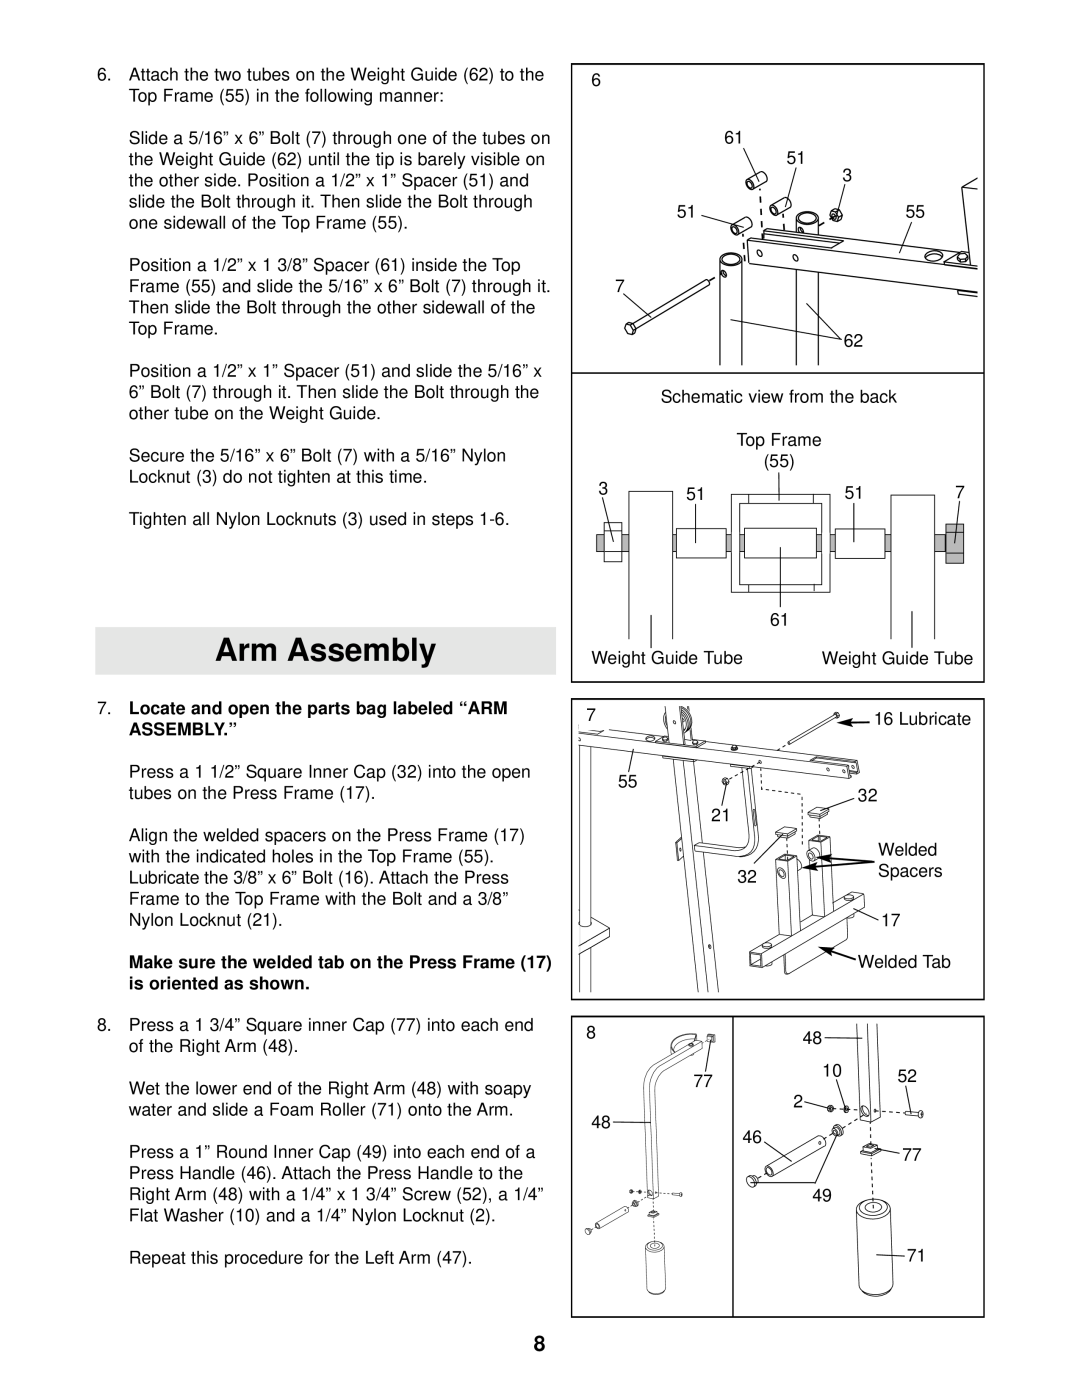 Weider 740 user manual Arm Assembly, Locate and open the parts bag labeled “ARM, Assembly.”, is oriented as shown 